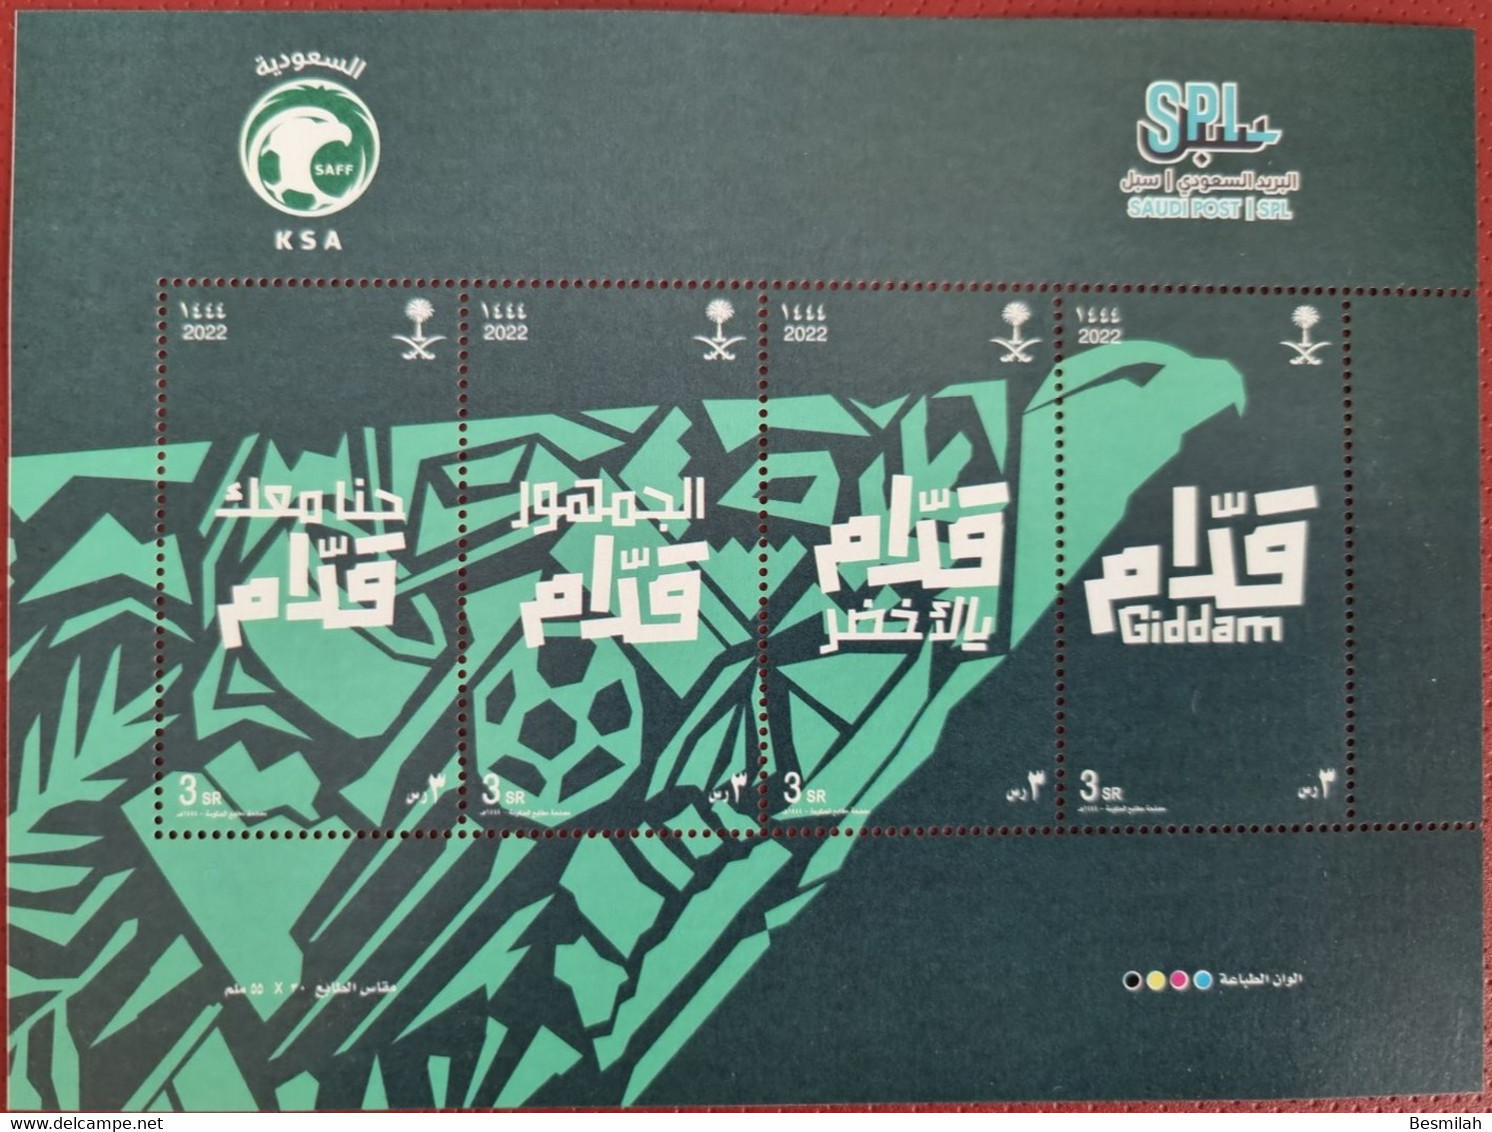 Saudi Arabia Stamp Giddam For Fifa 2022 (1444 Hijry) 8 Pieces Of 3 Riyals With 2 First Day Version Covers + Card - Arabia Saudita